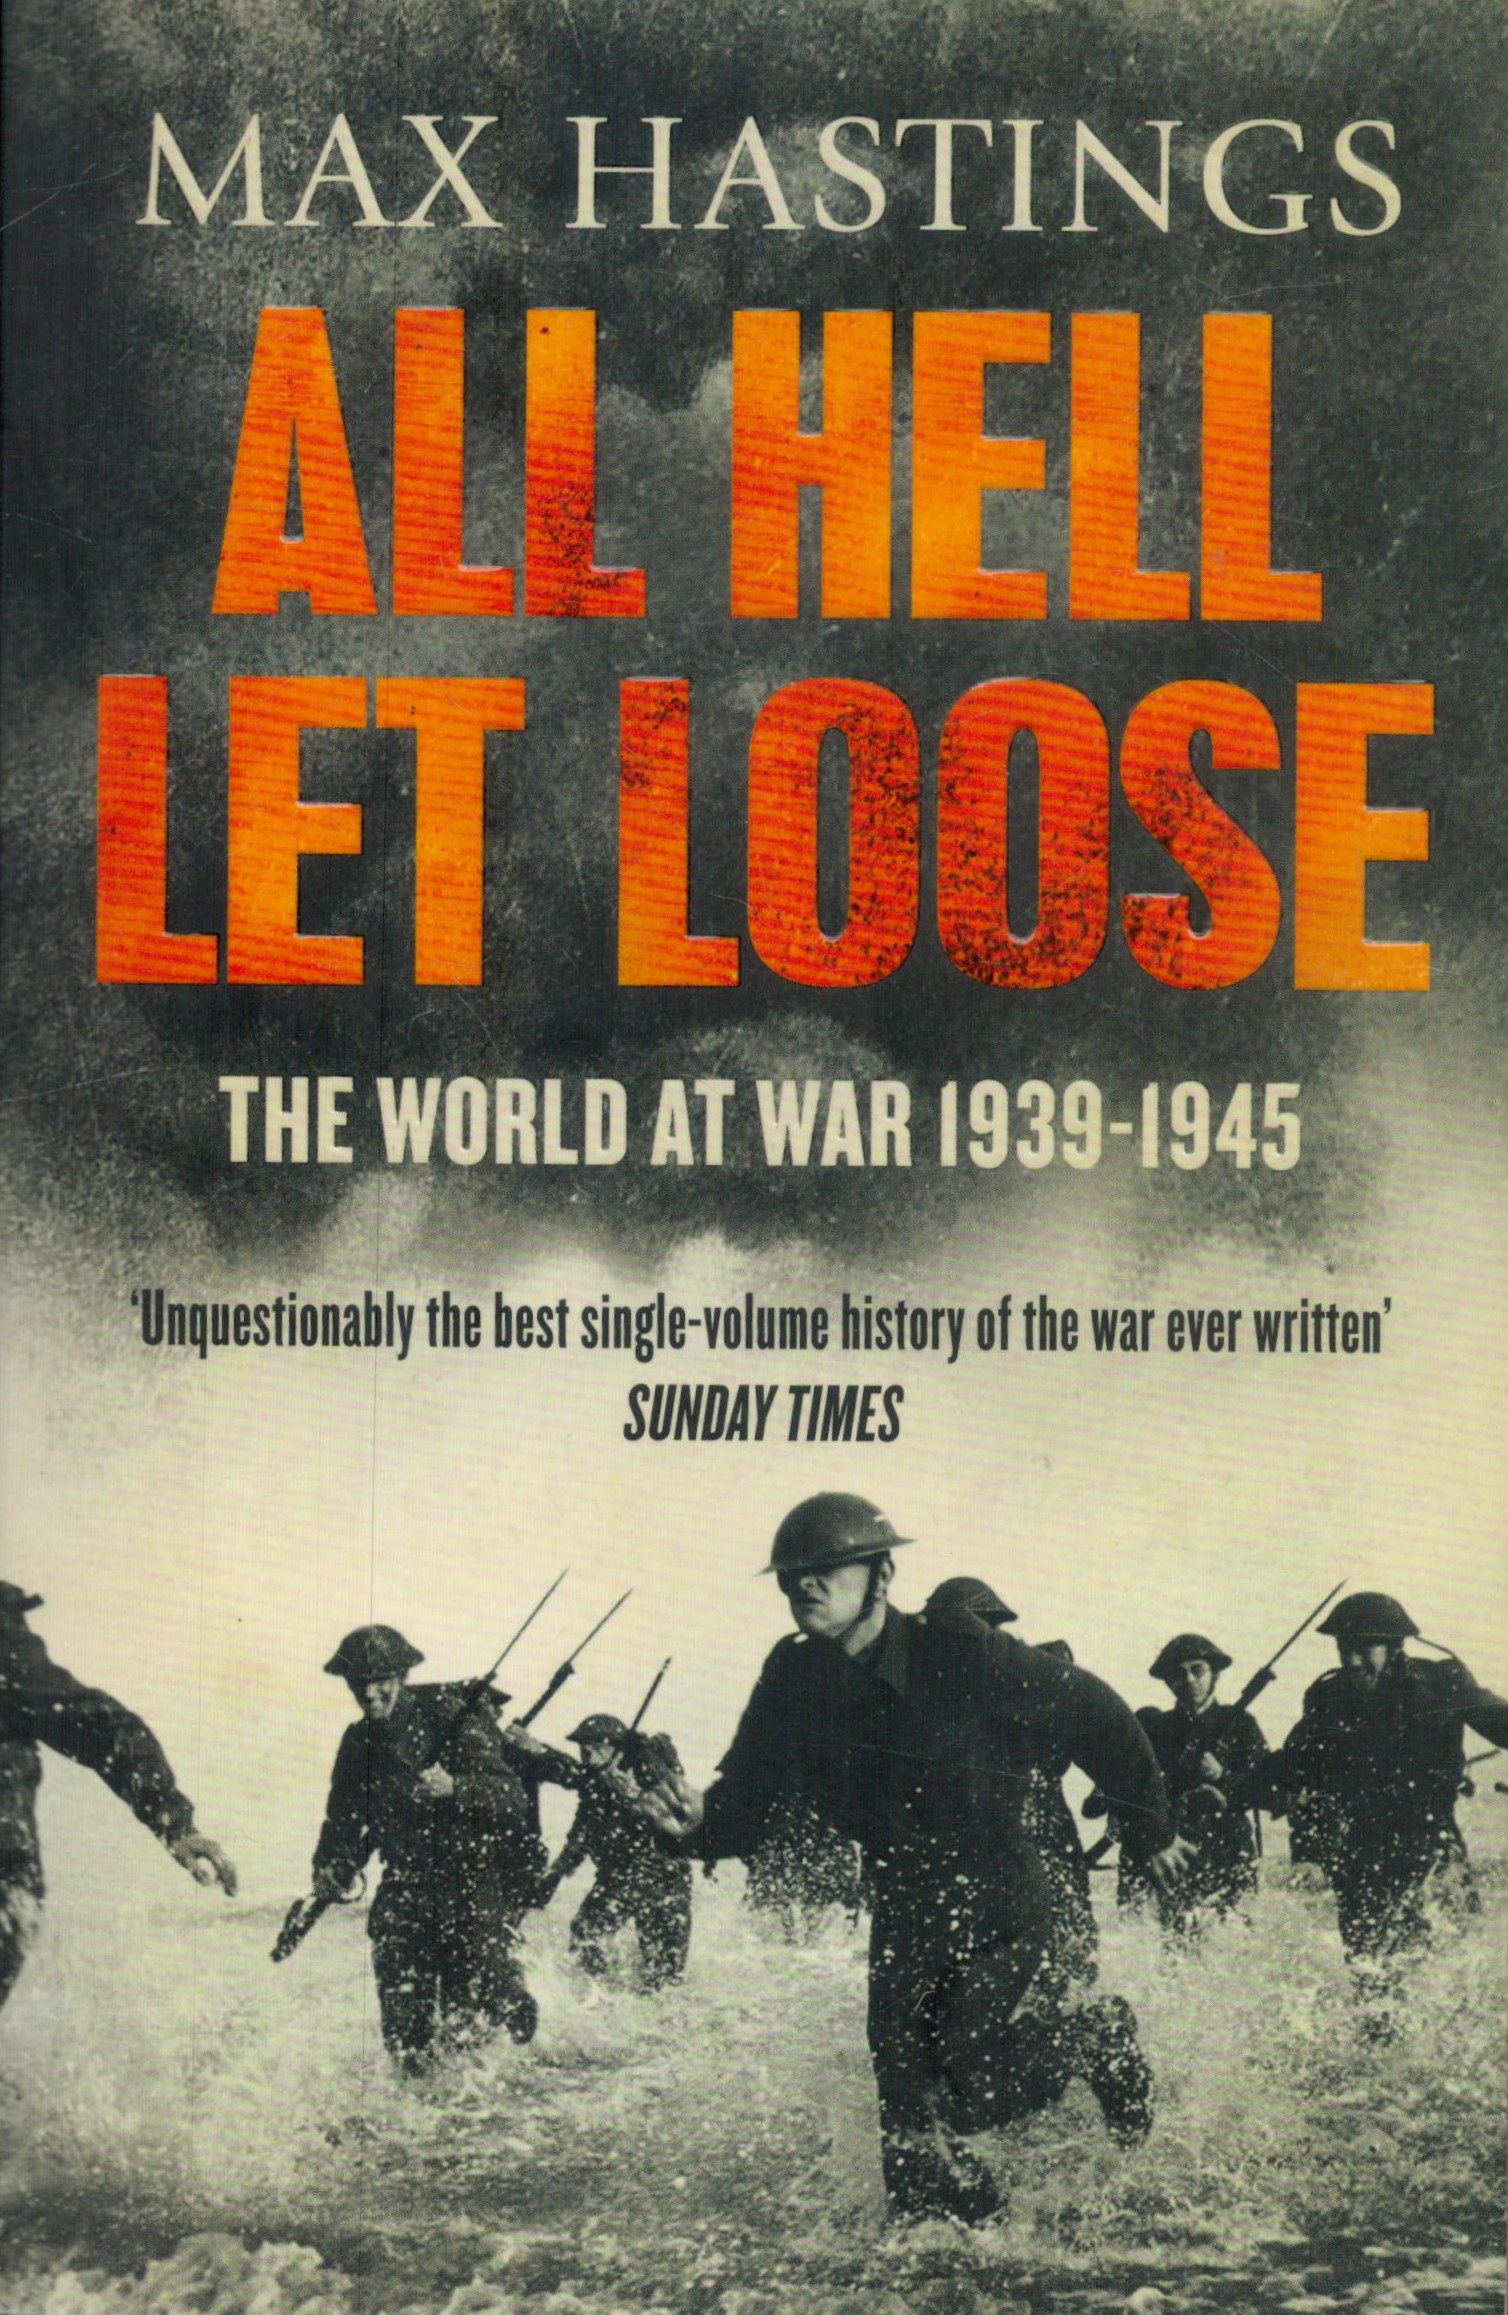 All Hell Let Loose - The World at War 1939-1945 by Max Hastings 2012 Softback Book with 748 pages